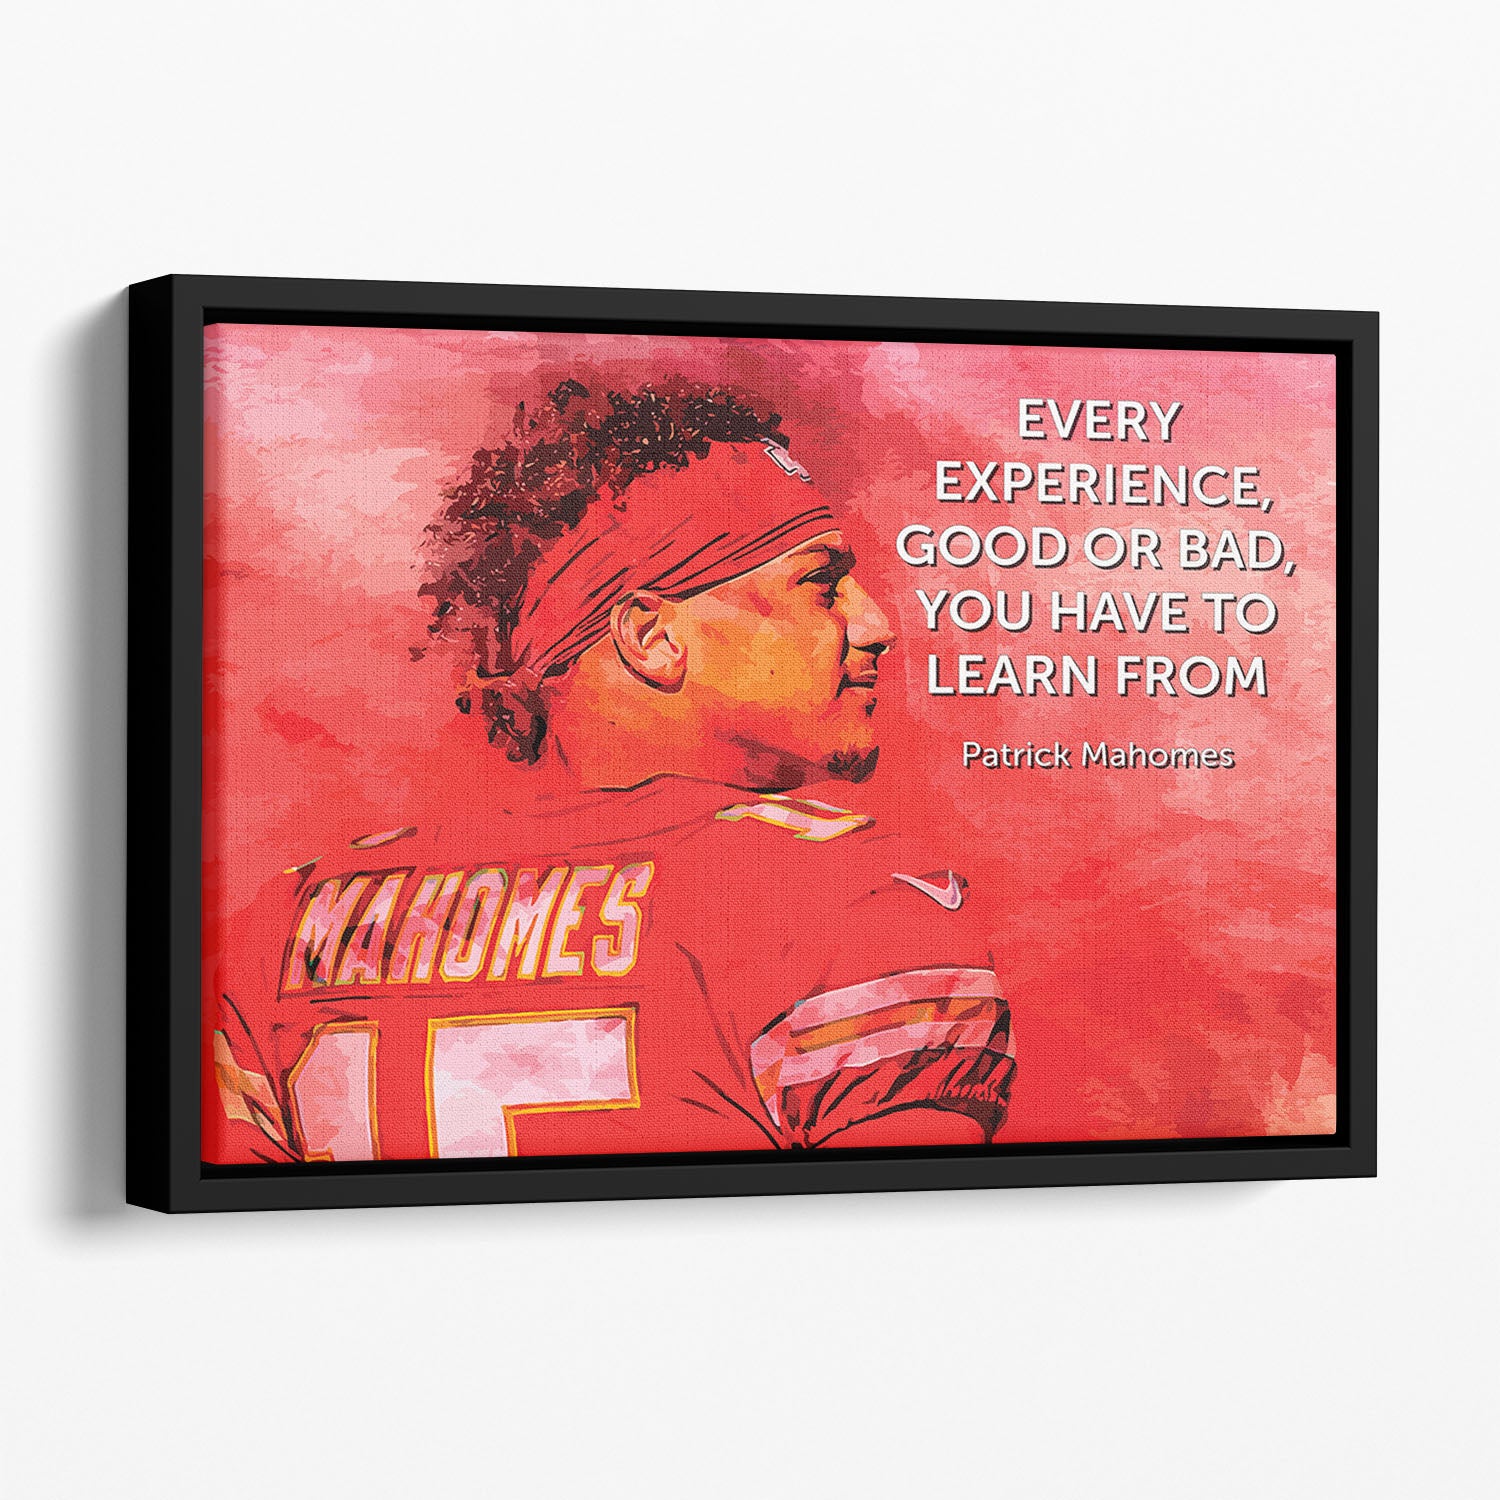 Patrick Mahomes Quote Floating Framed Canvas - Canvas Art Rocks - 1